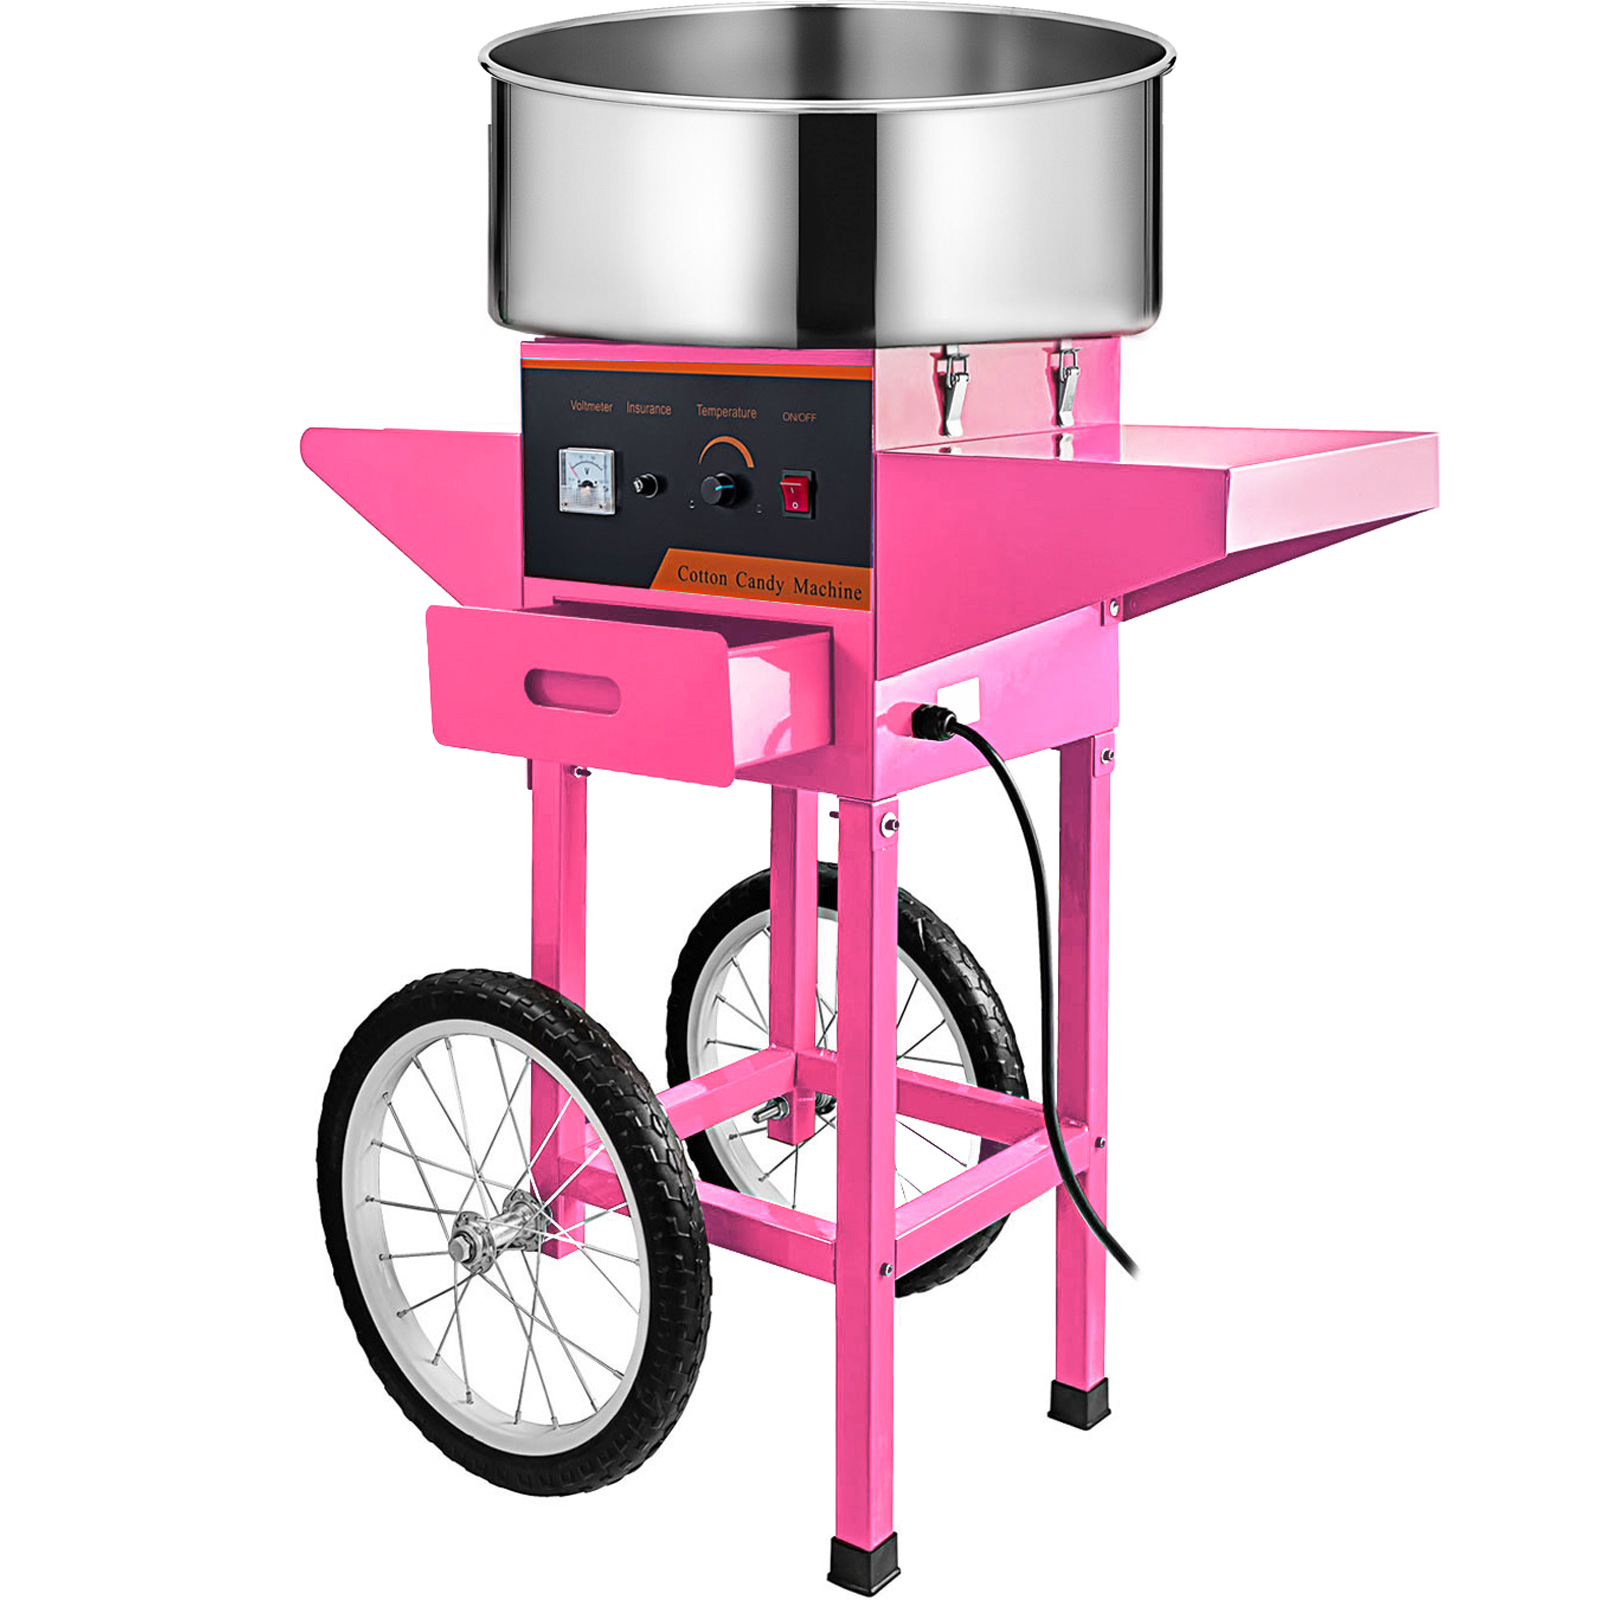 Details about   21" Cotton Candy Maker Commercial Electric Machine Kids Party Sugar Floss Pink 